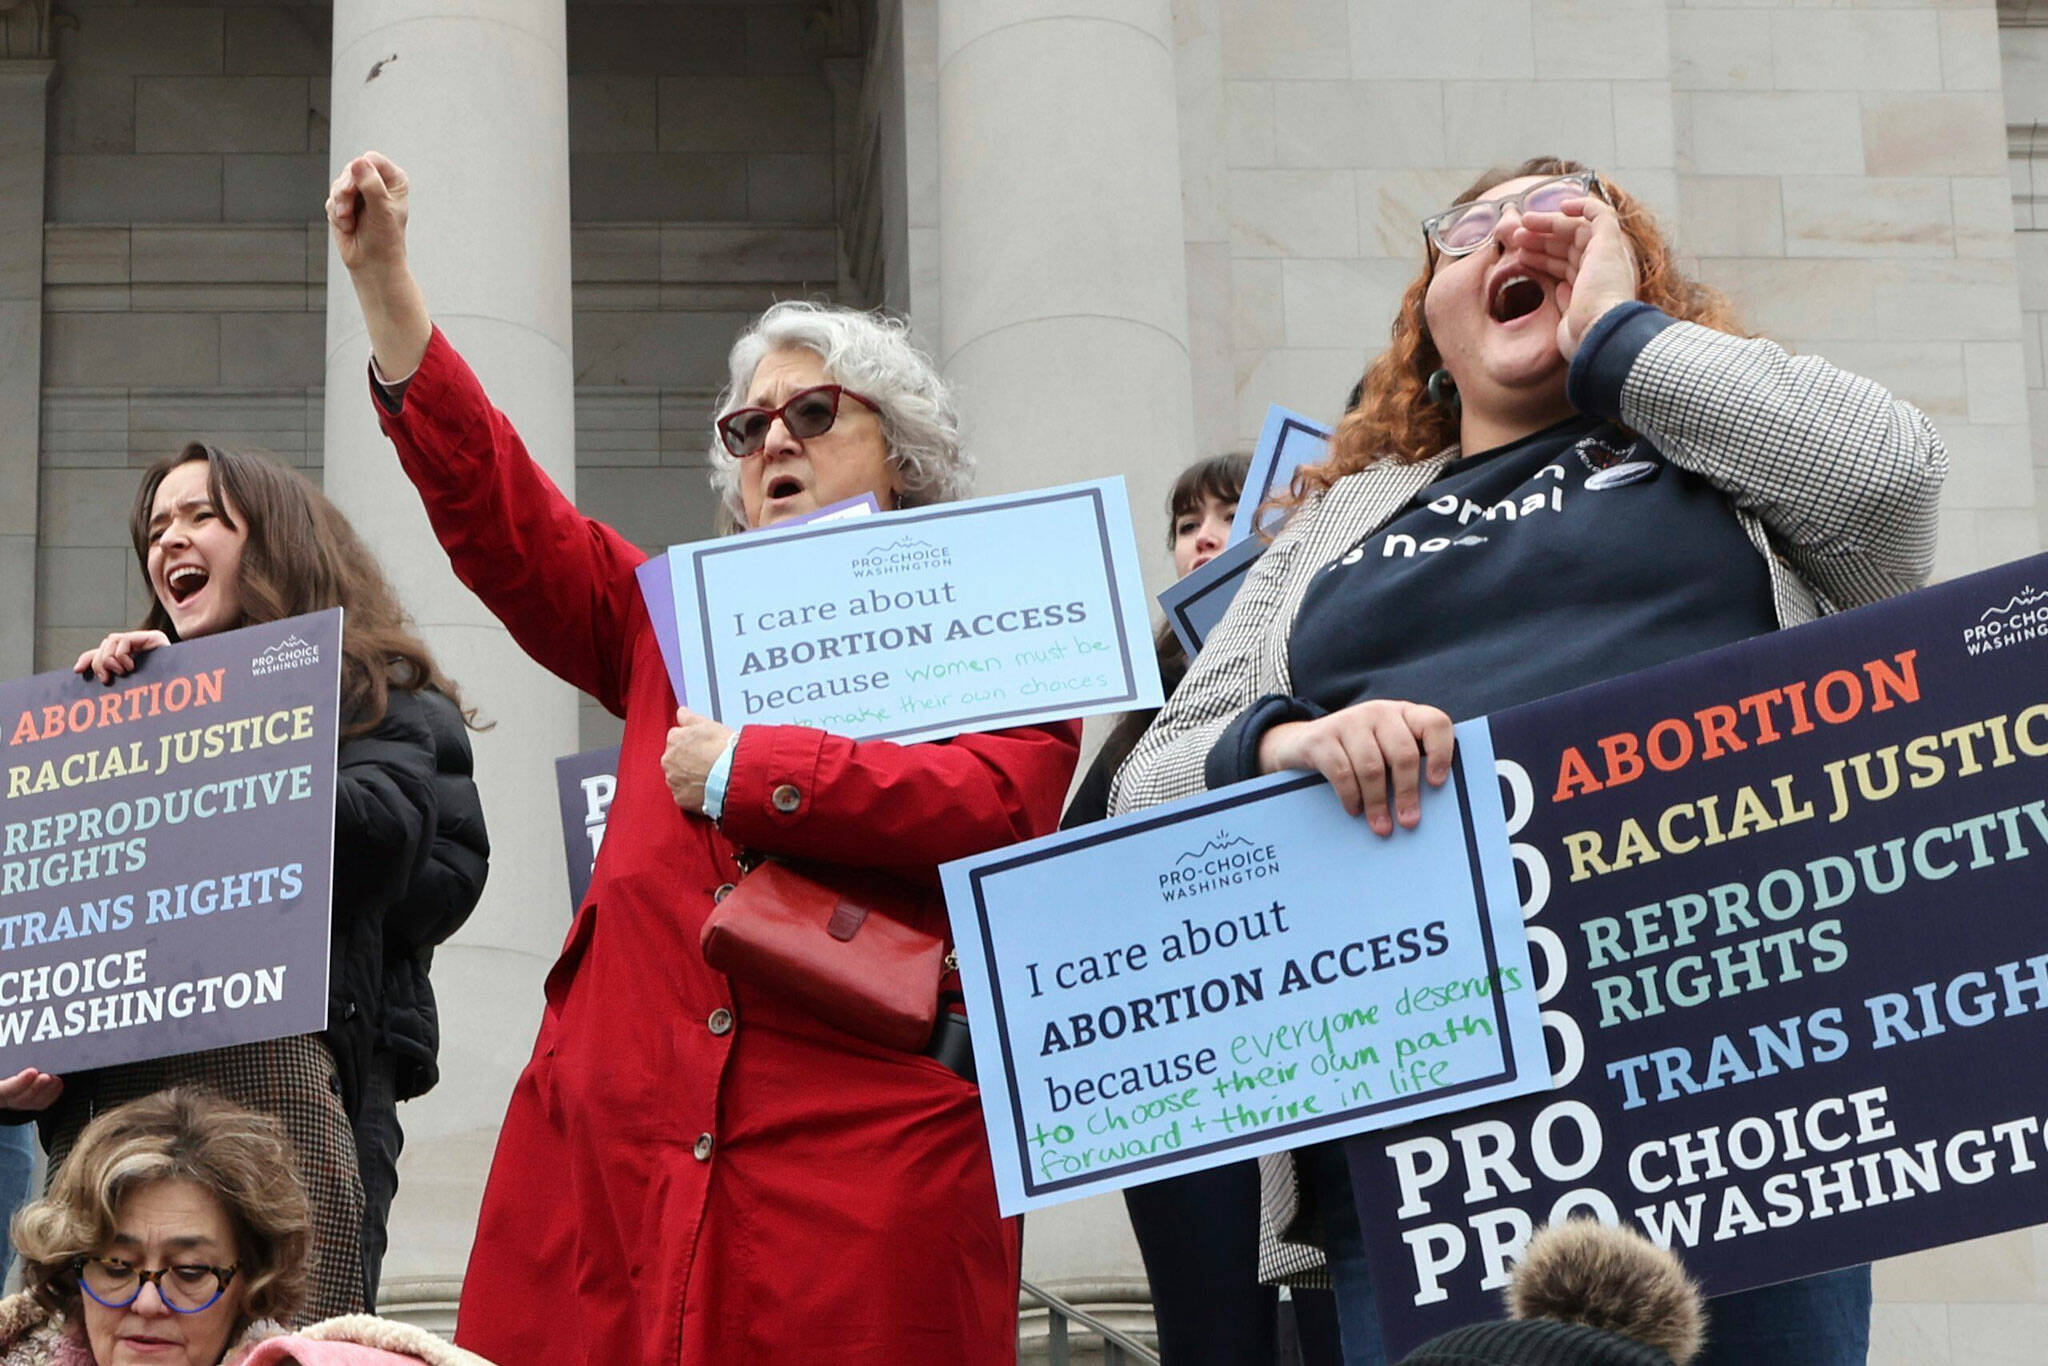 People cheer Jan. 24 during an abortion rights rally at the State Capitol in Olympia. (Karen Ducey / The Seattle Times via AP)